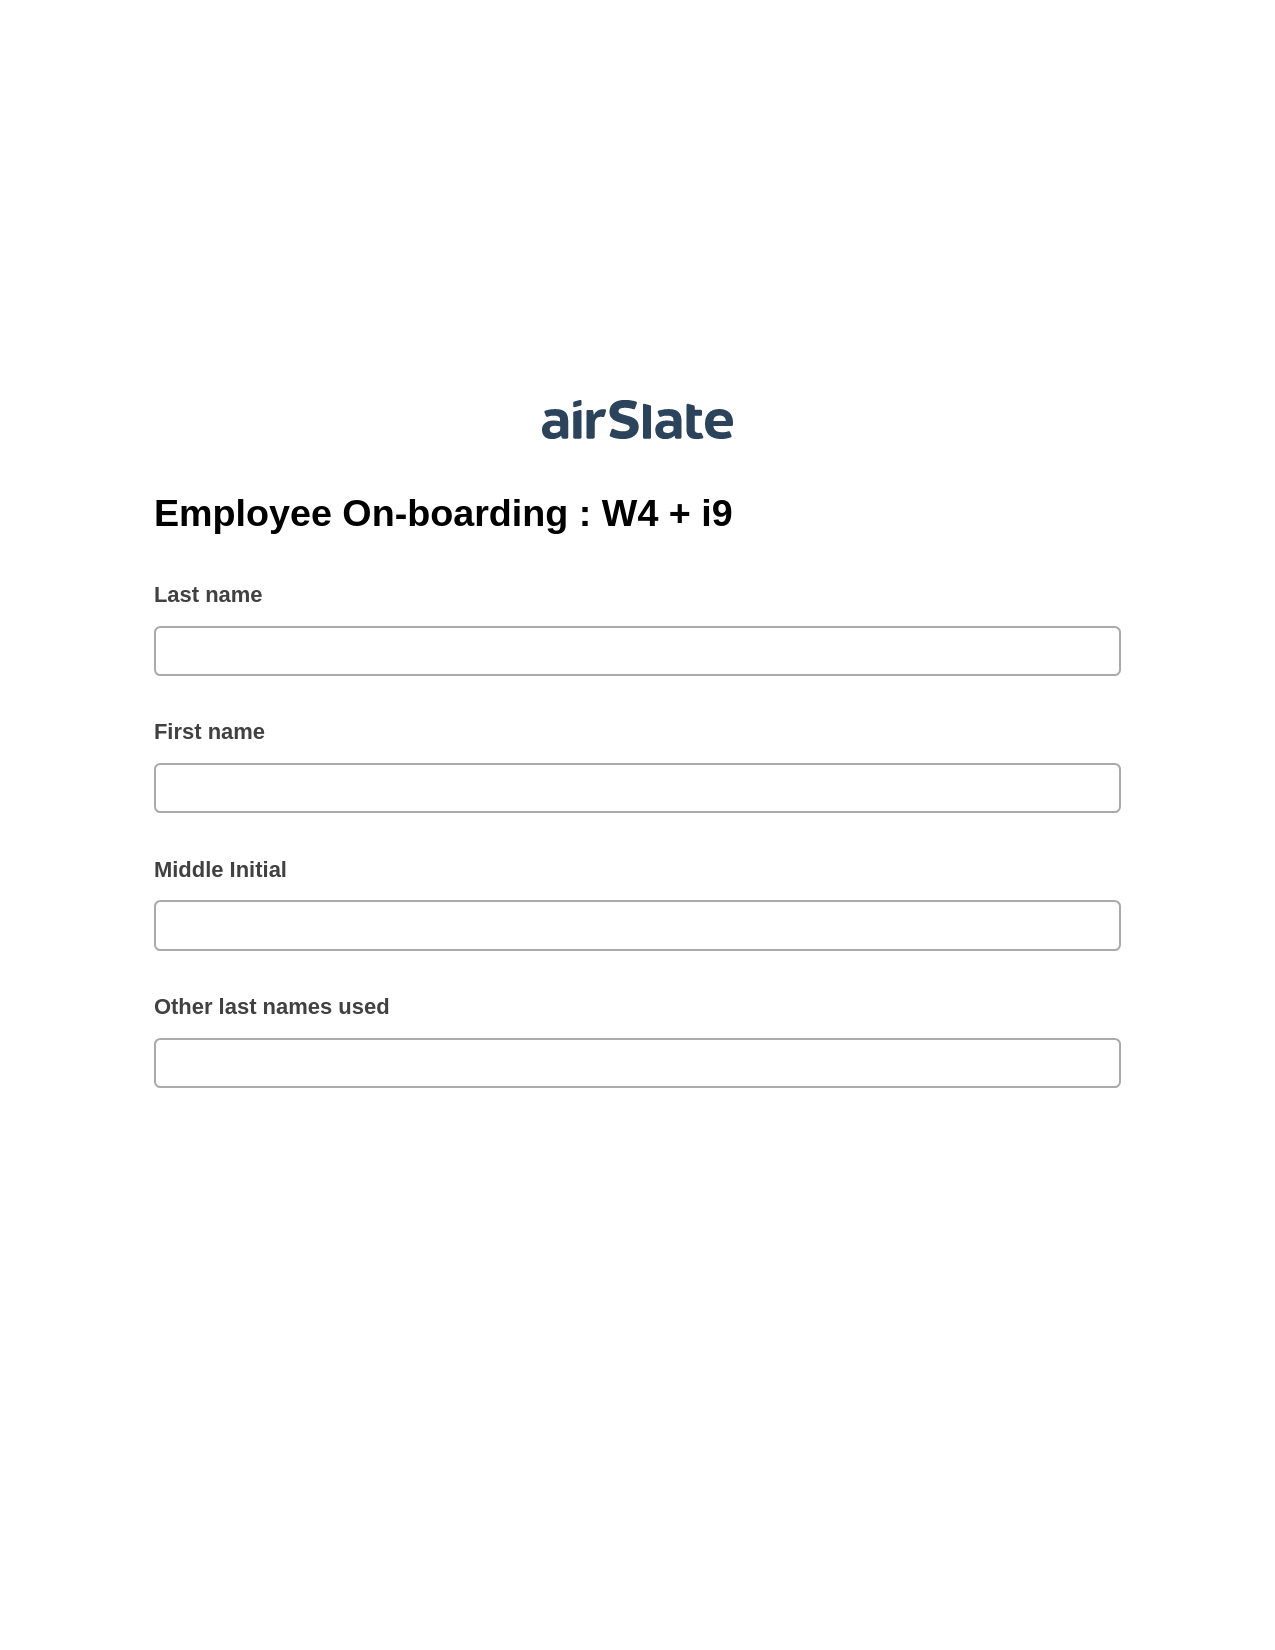 Employee On-boarding : W4 + i9 Pre-fill Slate from MS Dynamics 365 Records Bot, Export to MS Dynamics 365 Bot, Text Message Notification Postfinish Bot